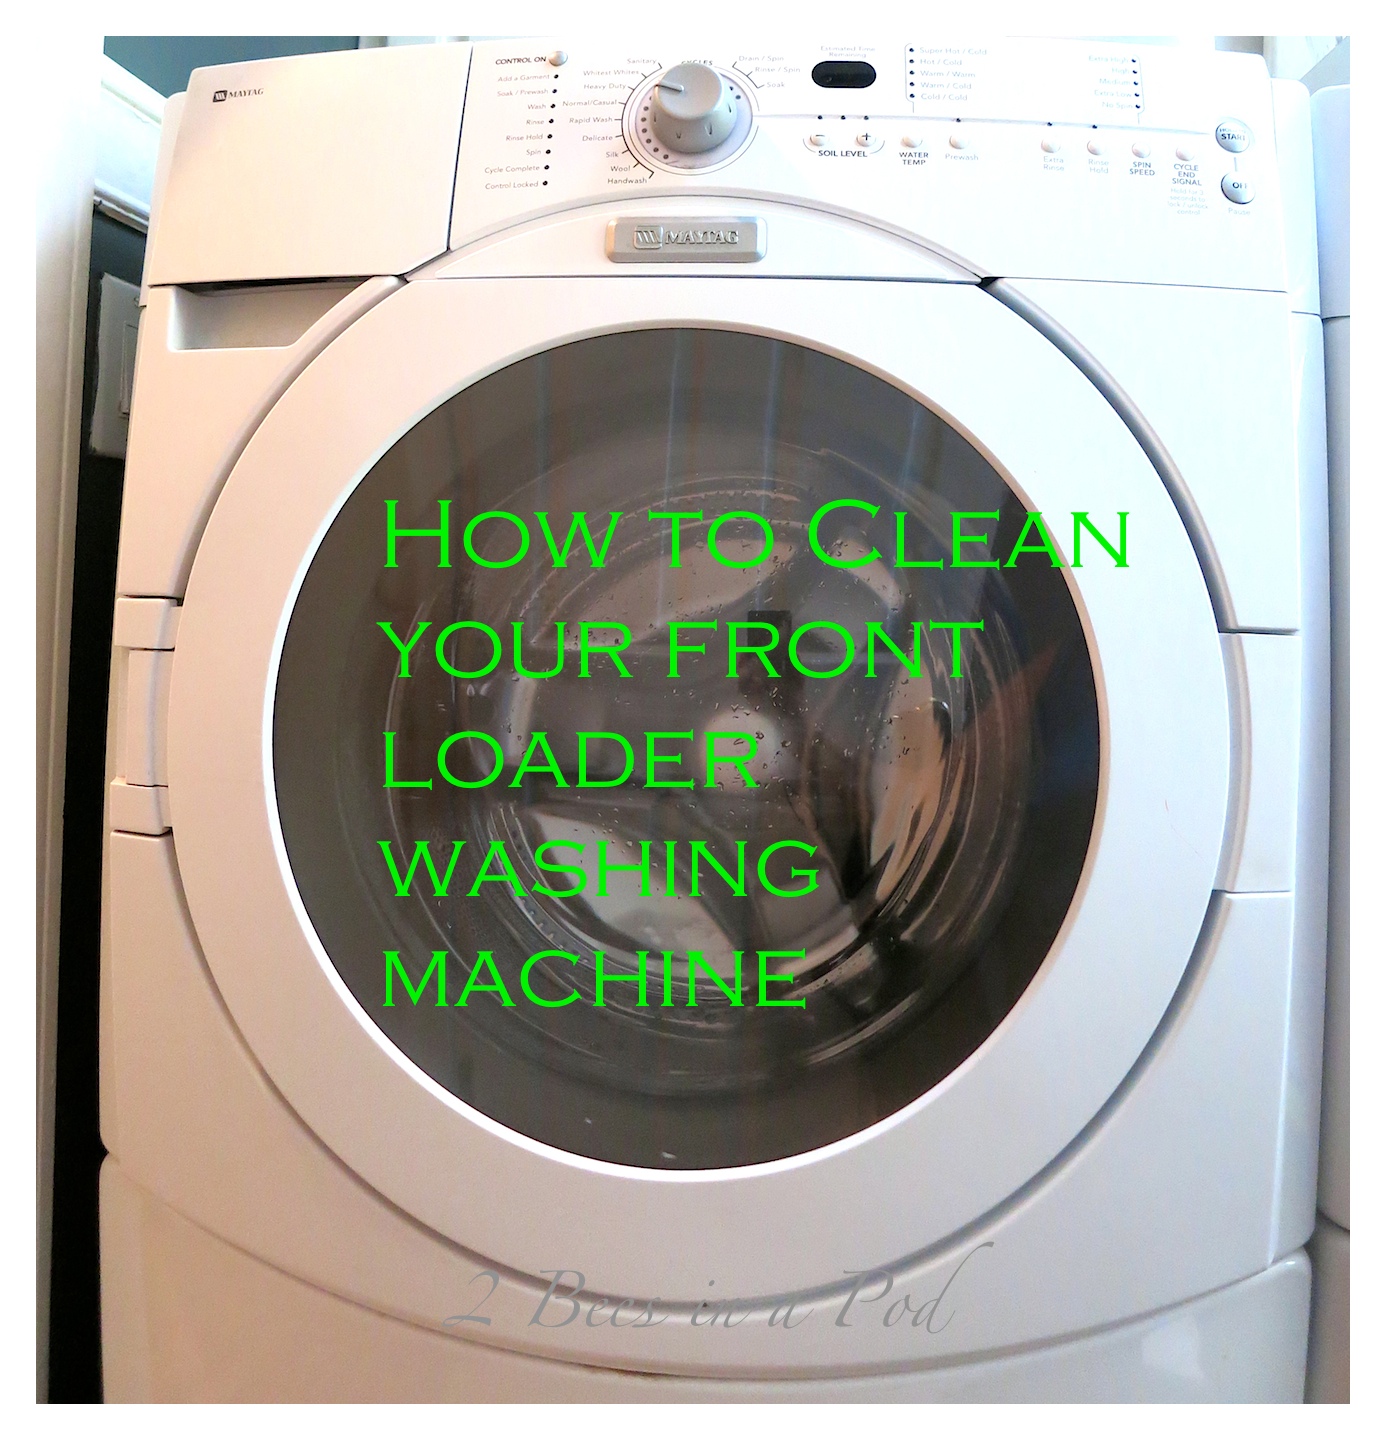 Who knew that a washing machine needed to be cleaned? Here is a How to clean your front loading washing machine tip.